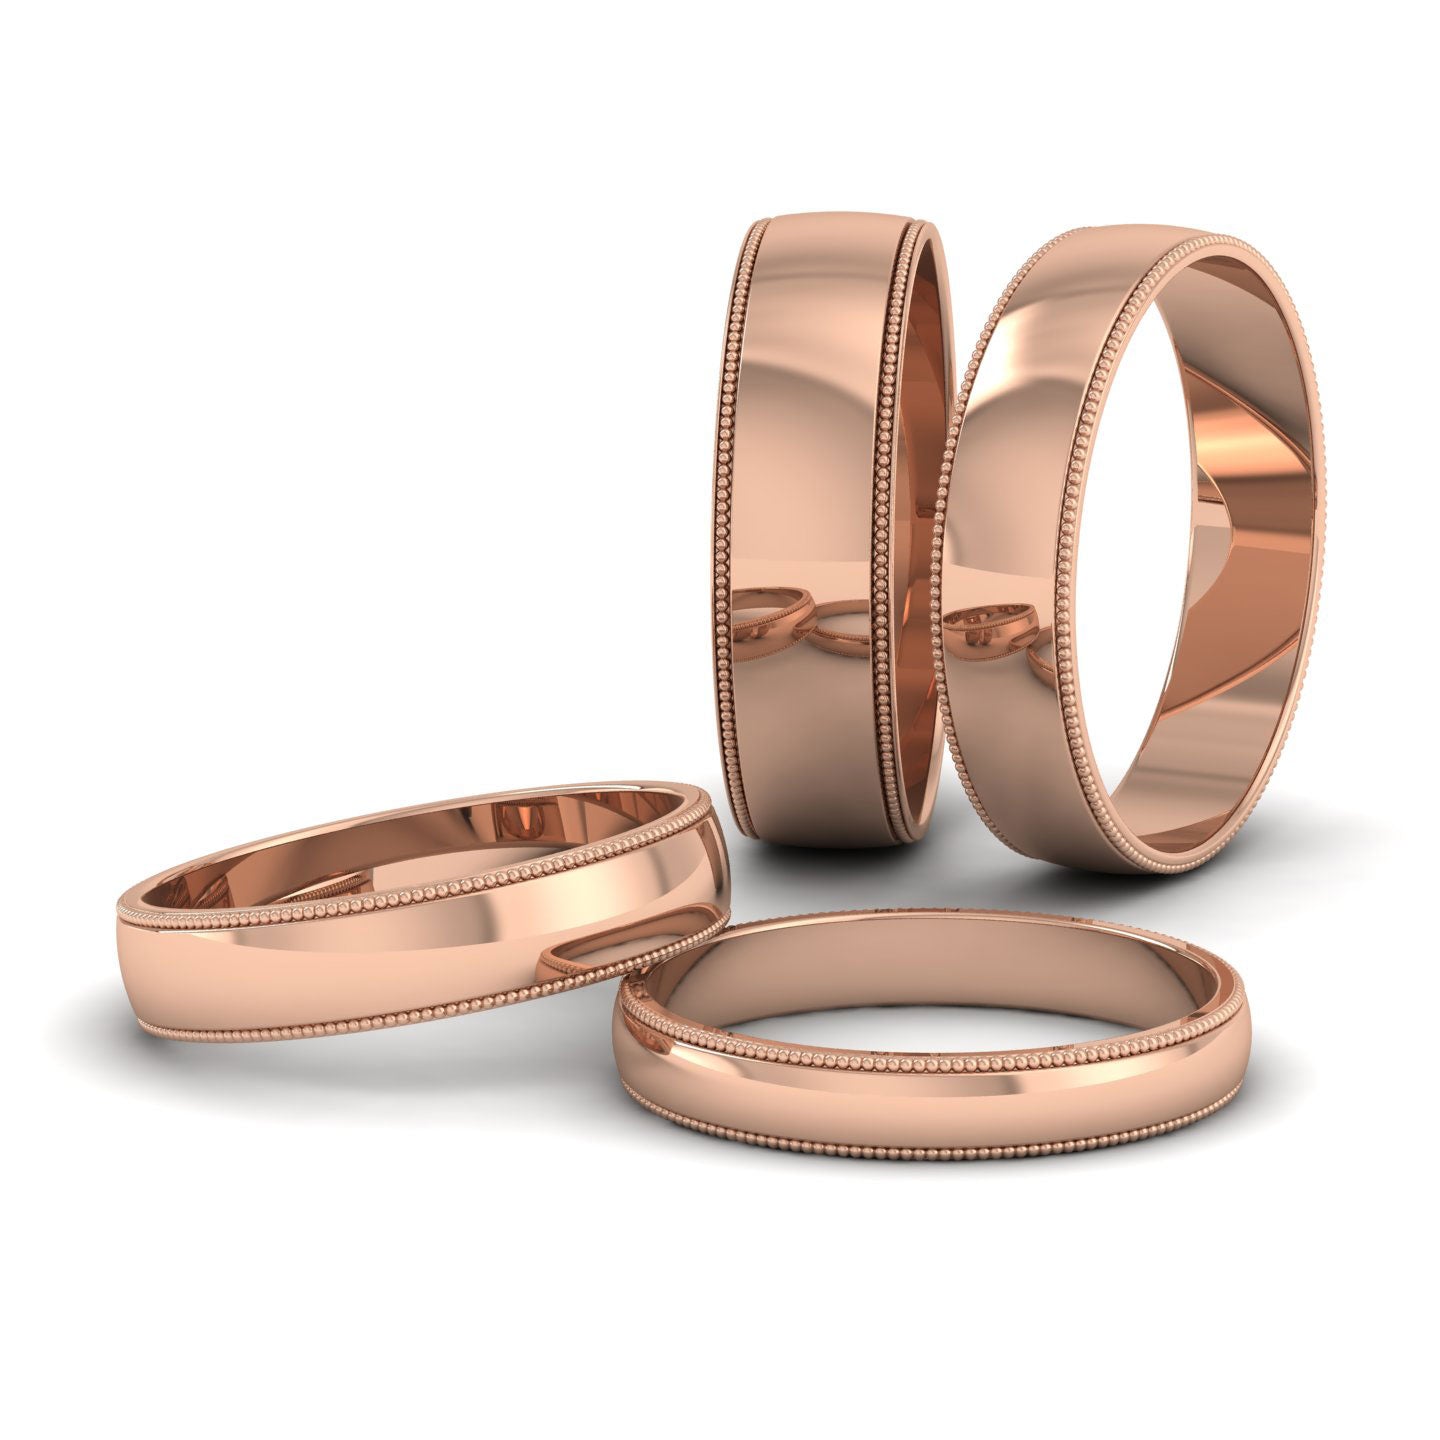 Millgrained Edge 9ct Rose Gold 6mm Wedding Ring